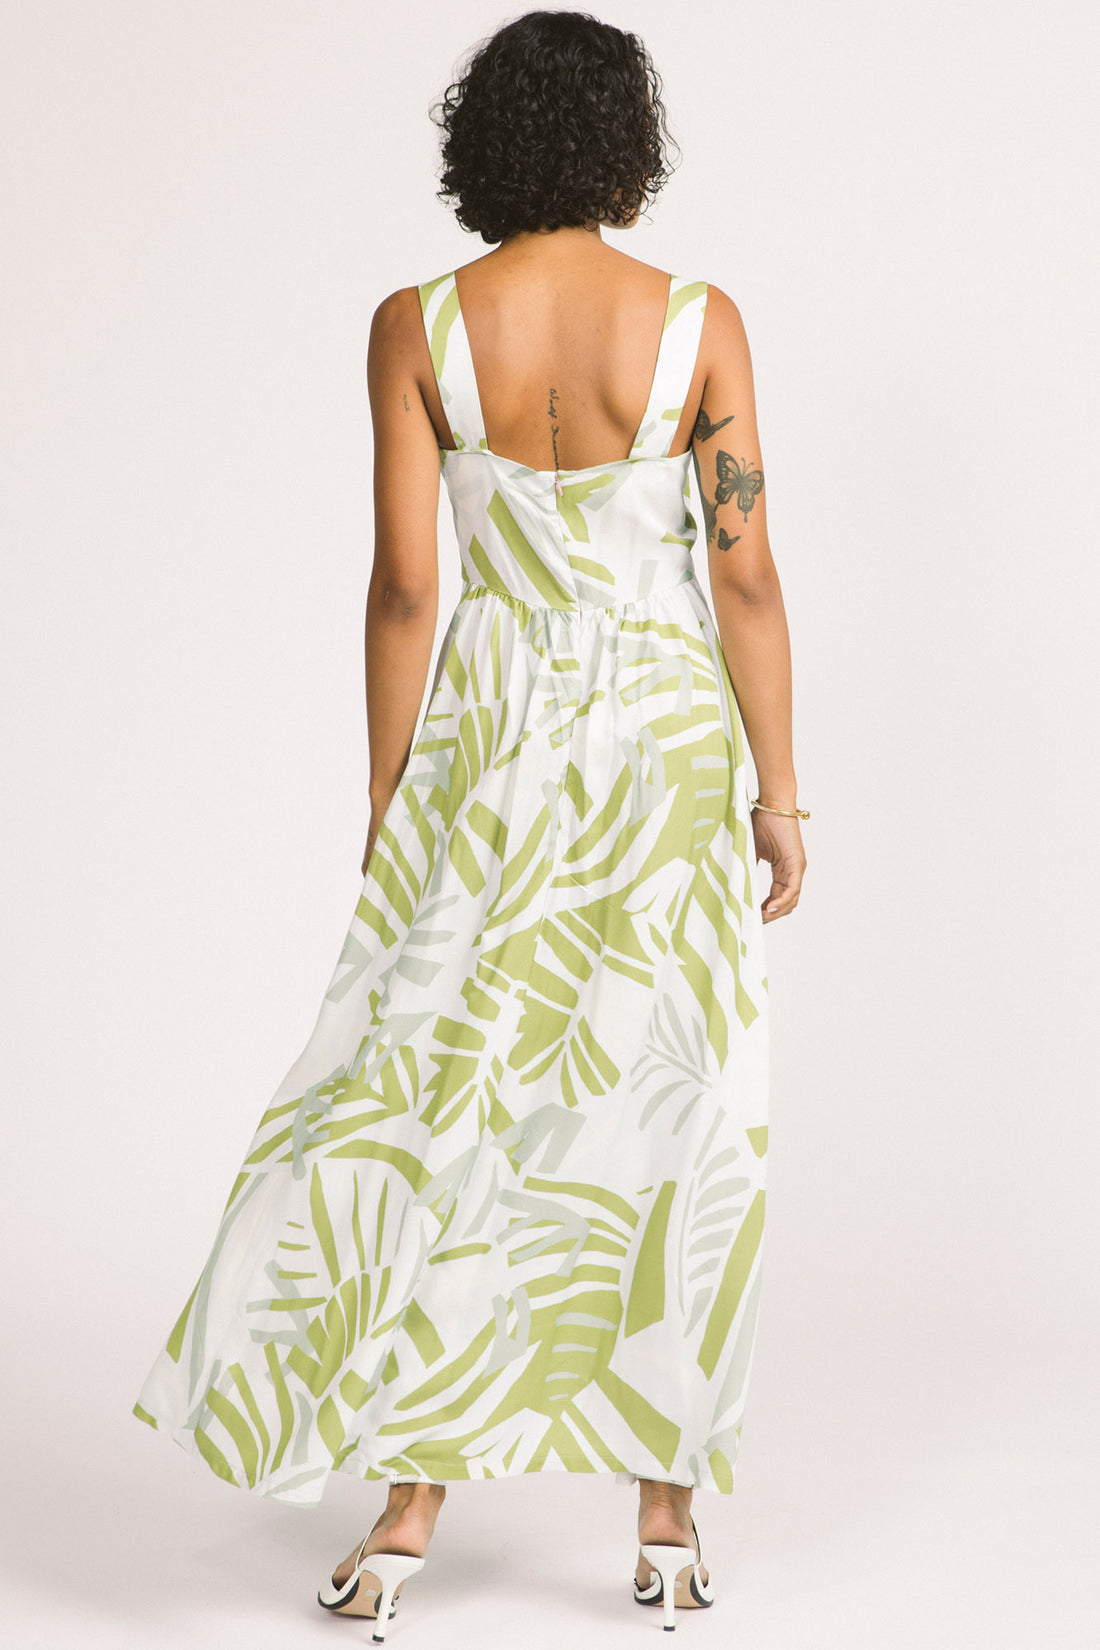 Alora Dress by Allison Wonderland, Frond Leaf, back view, wide straps, deep V-neckline, gathers on underbust seams, in-seam pockets, maxi skirt, eco-fabric, Lenzing Ecovero Viscose, sizes 2-12, made in Vancouver 